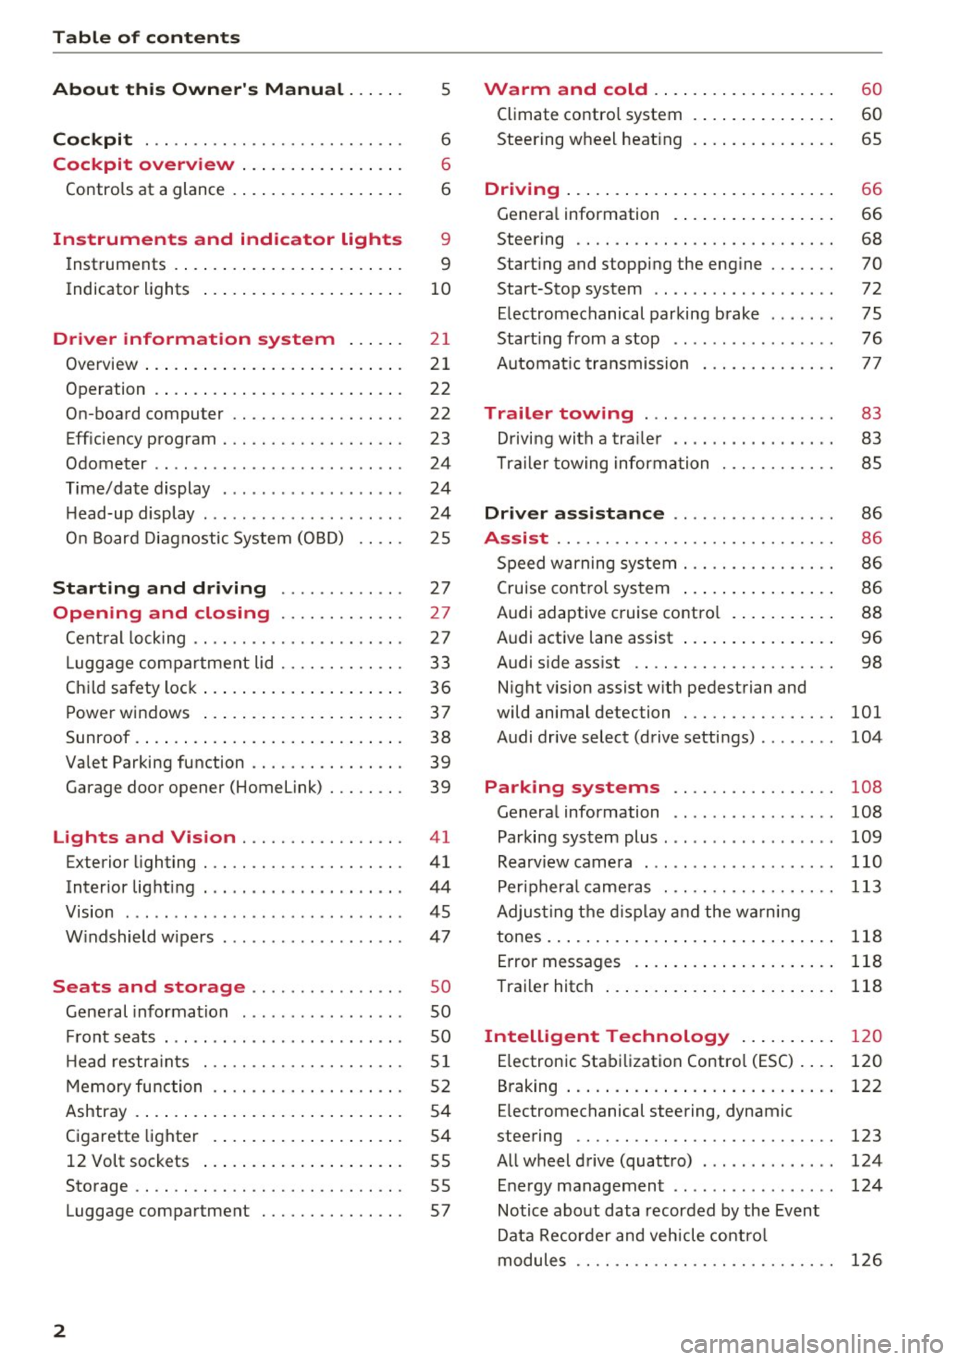 AUDI A6 2017  Owners Manual Table  of  contents 
About  this  Owners  Manual  ... .. . 
Cockpit  ... .. ............... .... ..  . 
Cockpit  overview  ................ . 
Controls  at  a glance  ... .......... .. .. . 
Instrume